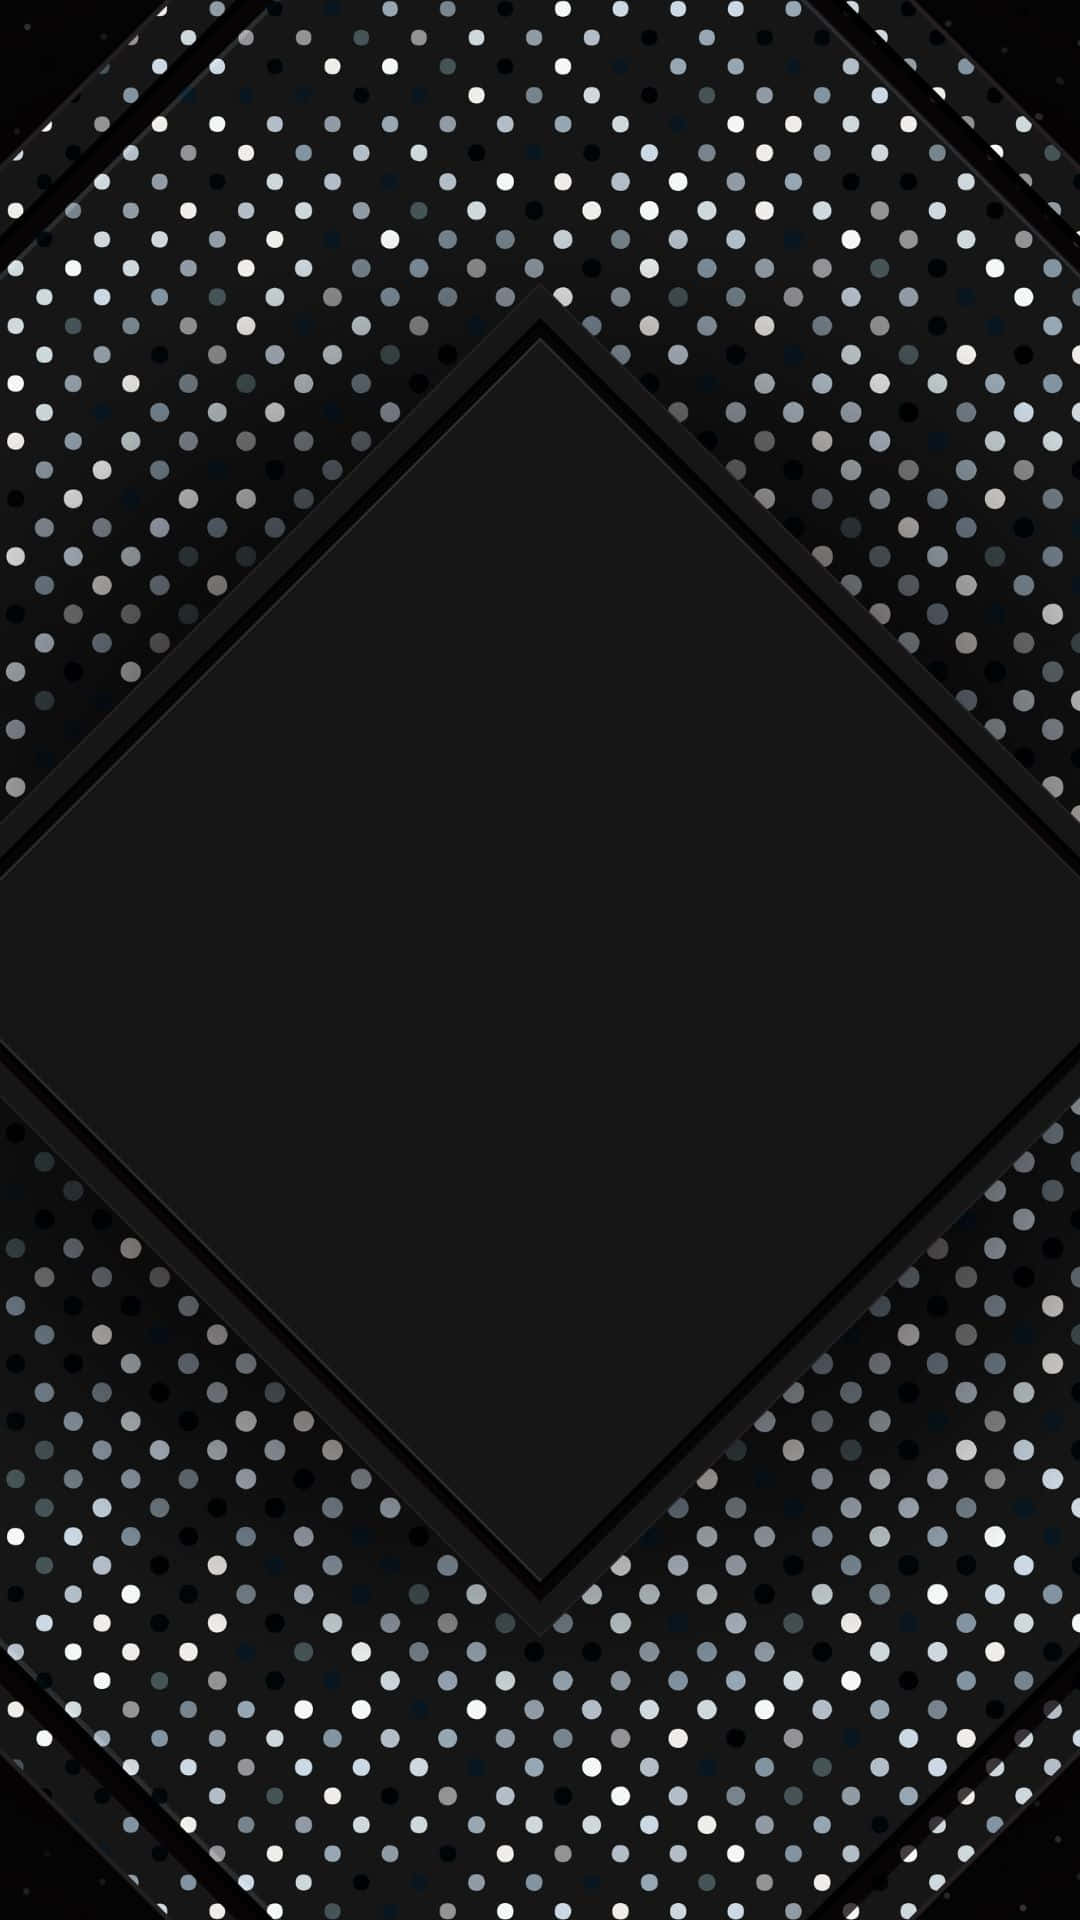 Diamond With White Dotted Frame Design Black Background